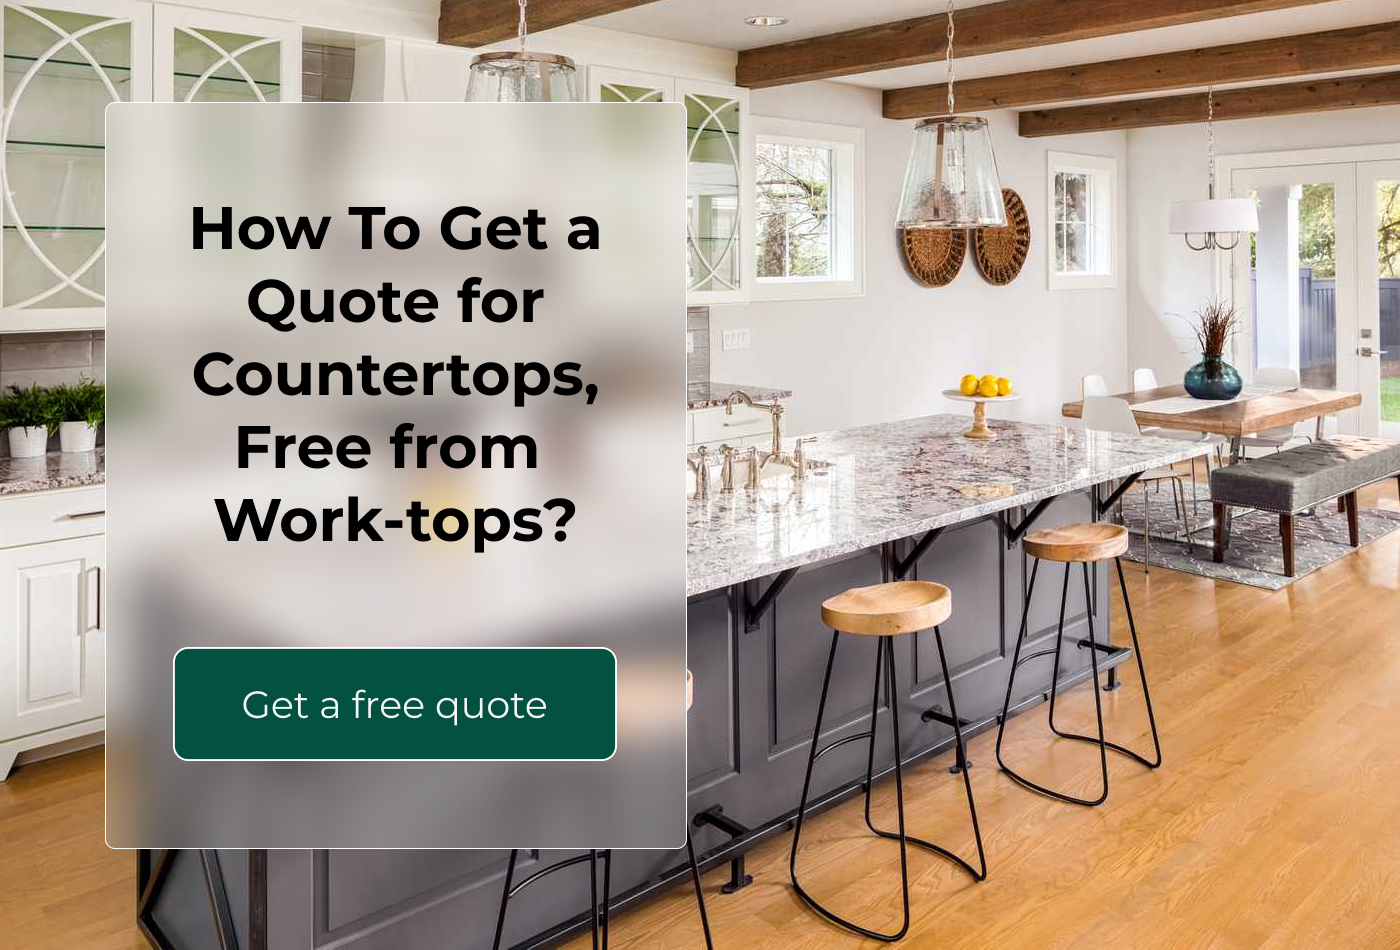 How To Get a Quote for Countertops, Free from Work-tops